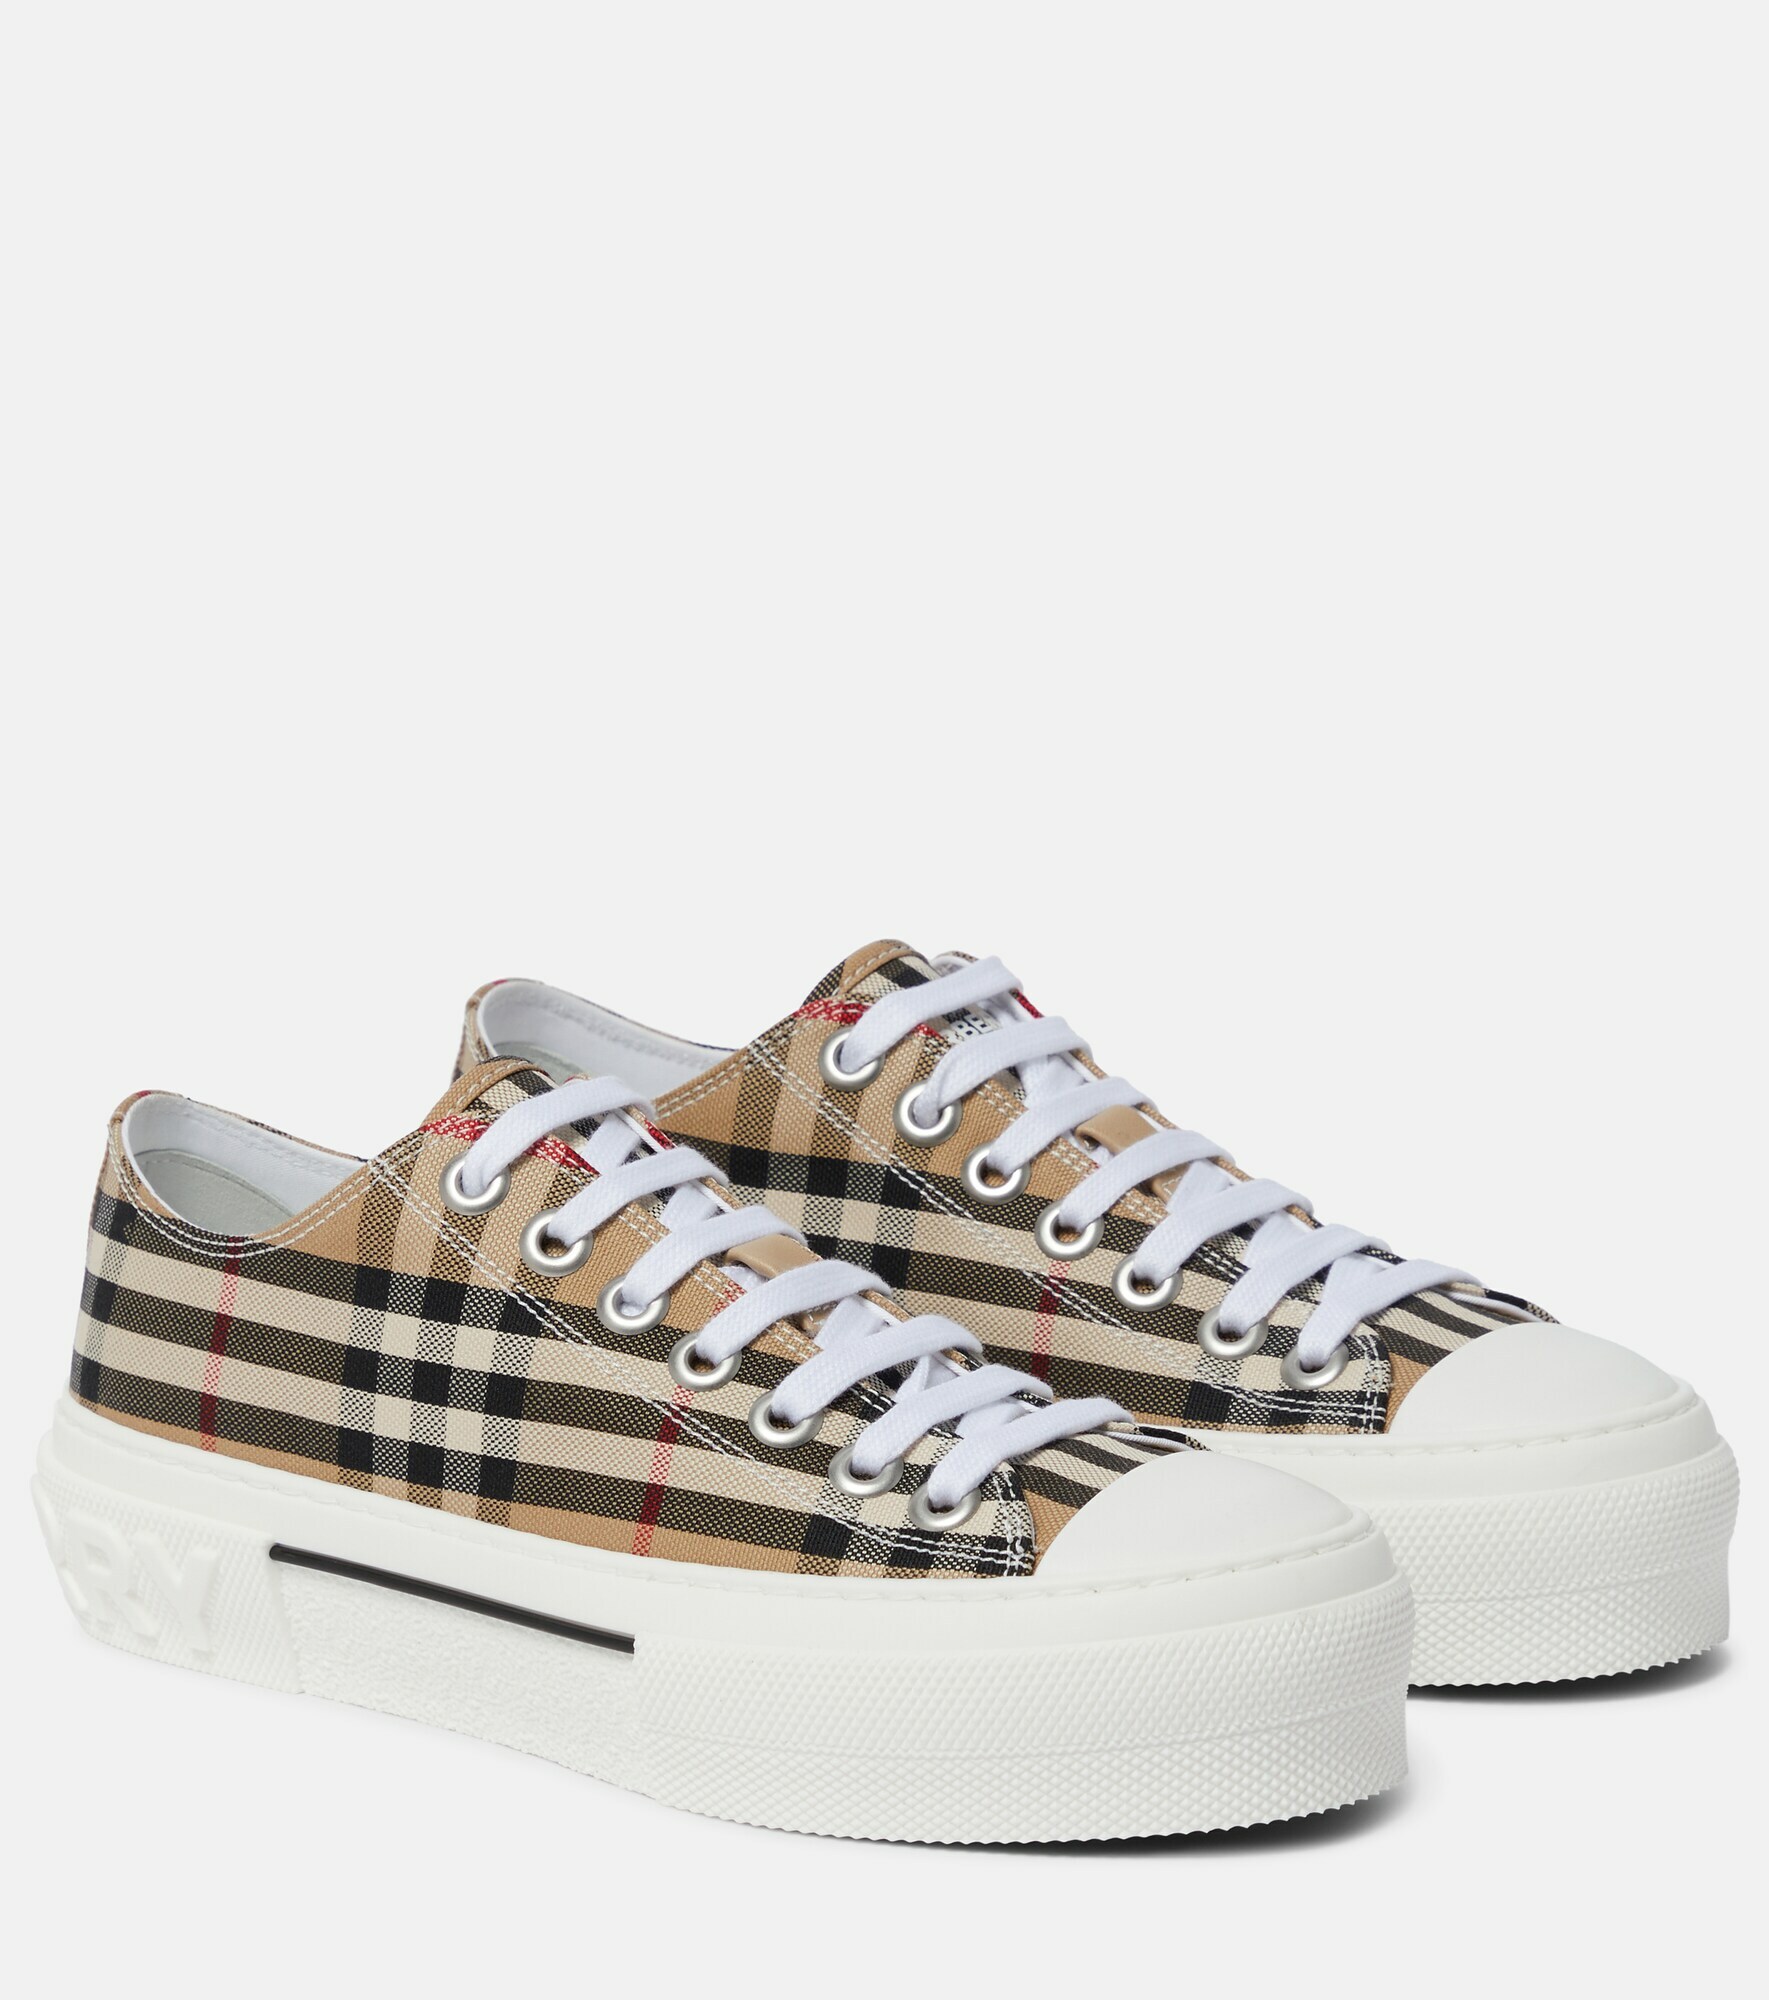 Burberry - Vintage Check canvas sneakers Burberry